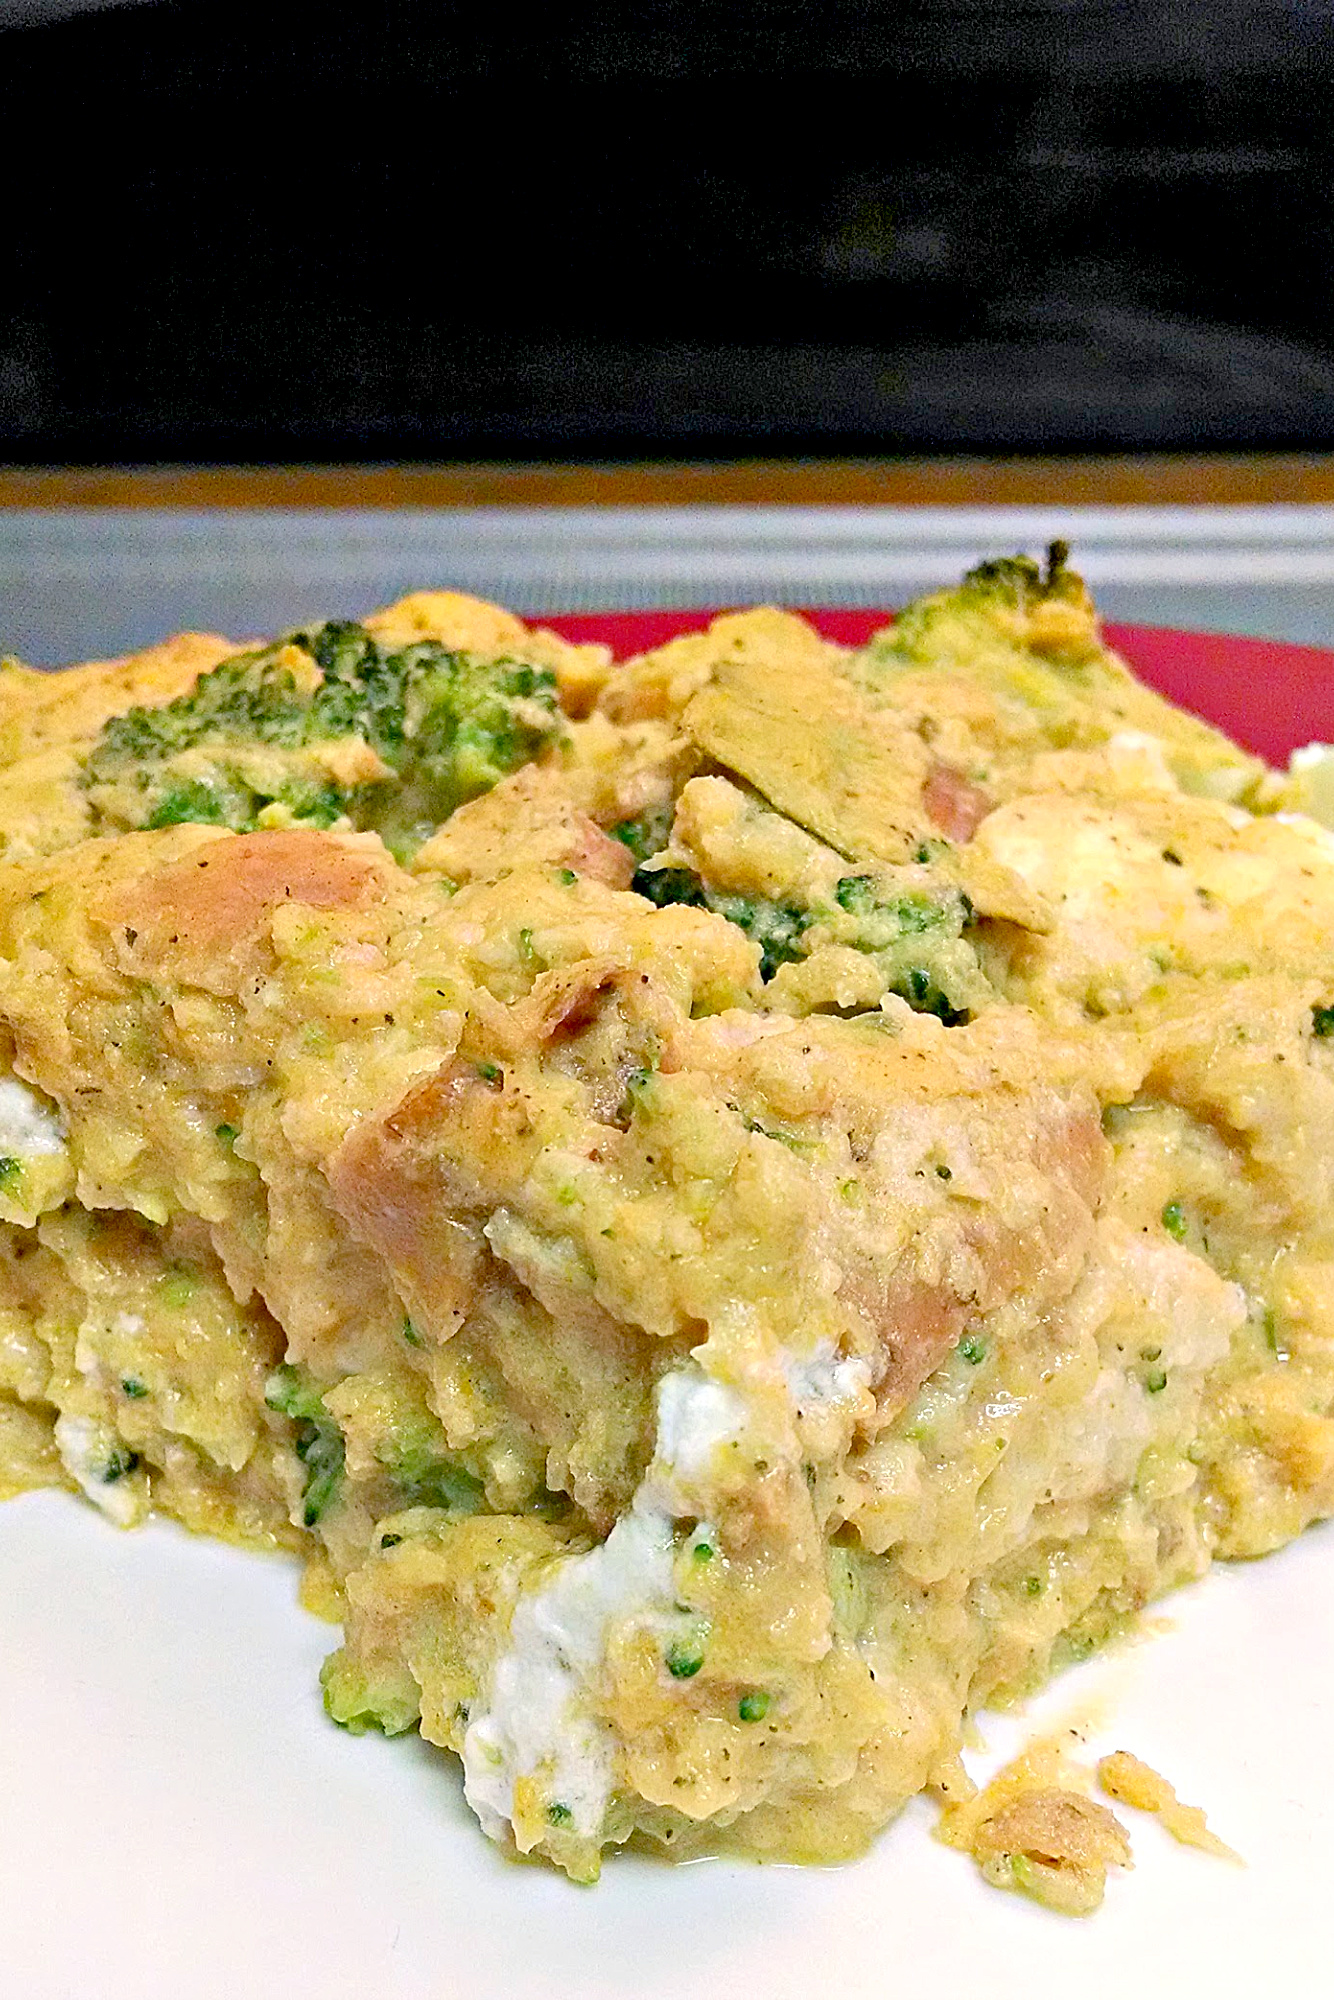 Hearty and packed with flavors, Squash and Broccoli Goat Cheese Strata is perfect for a meat free meal, light lunch, or even a brunch!